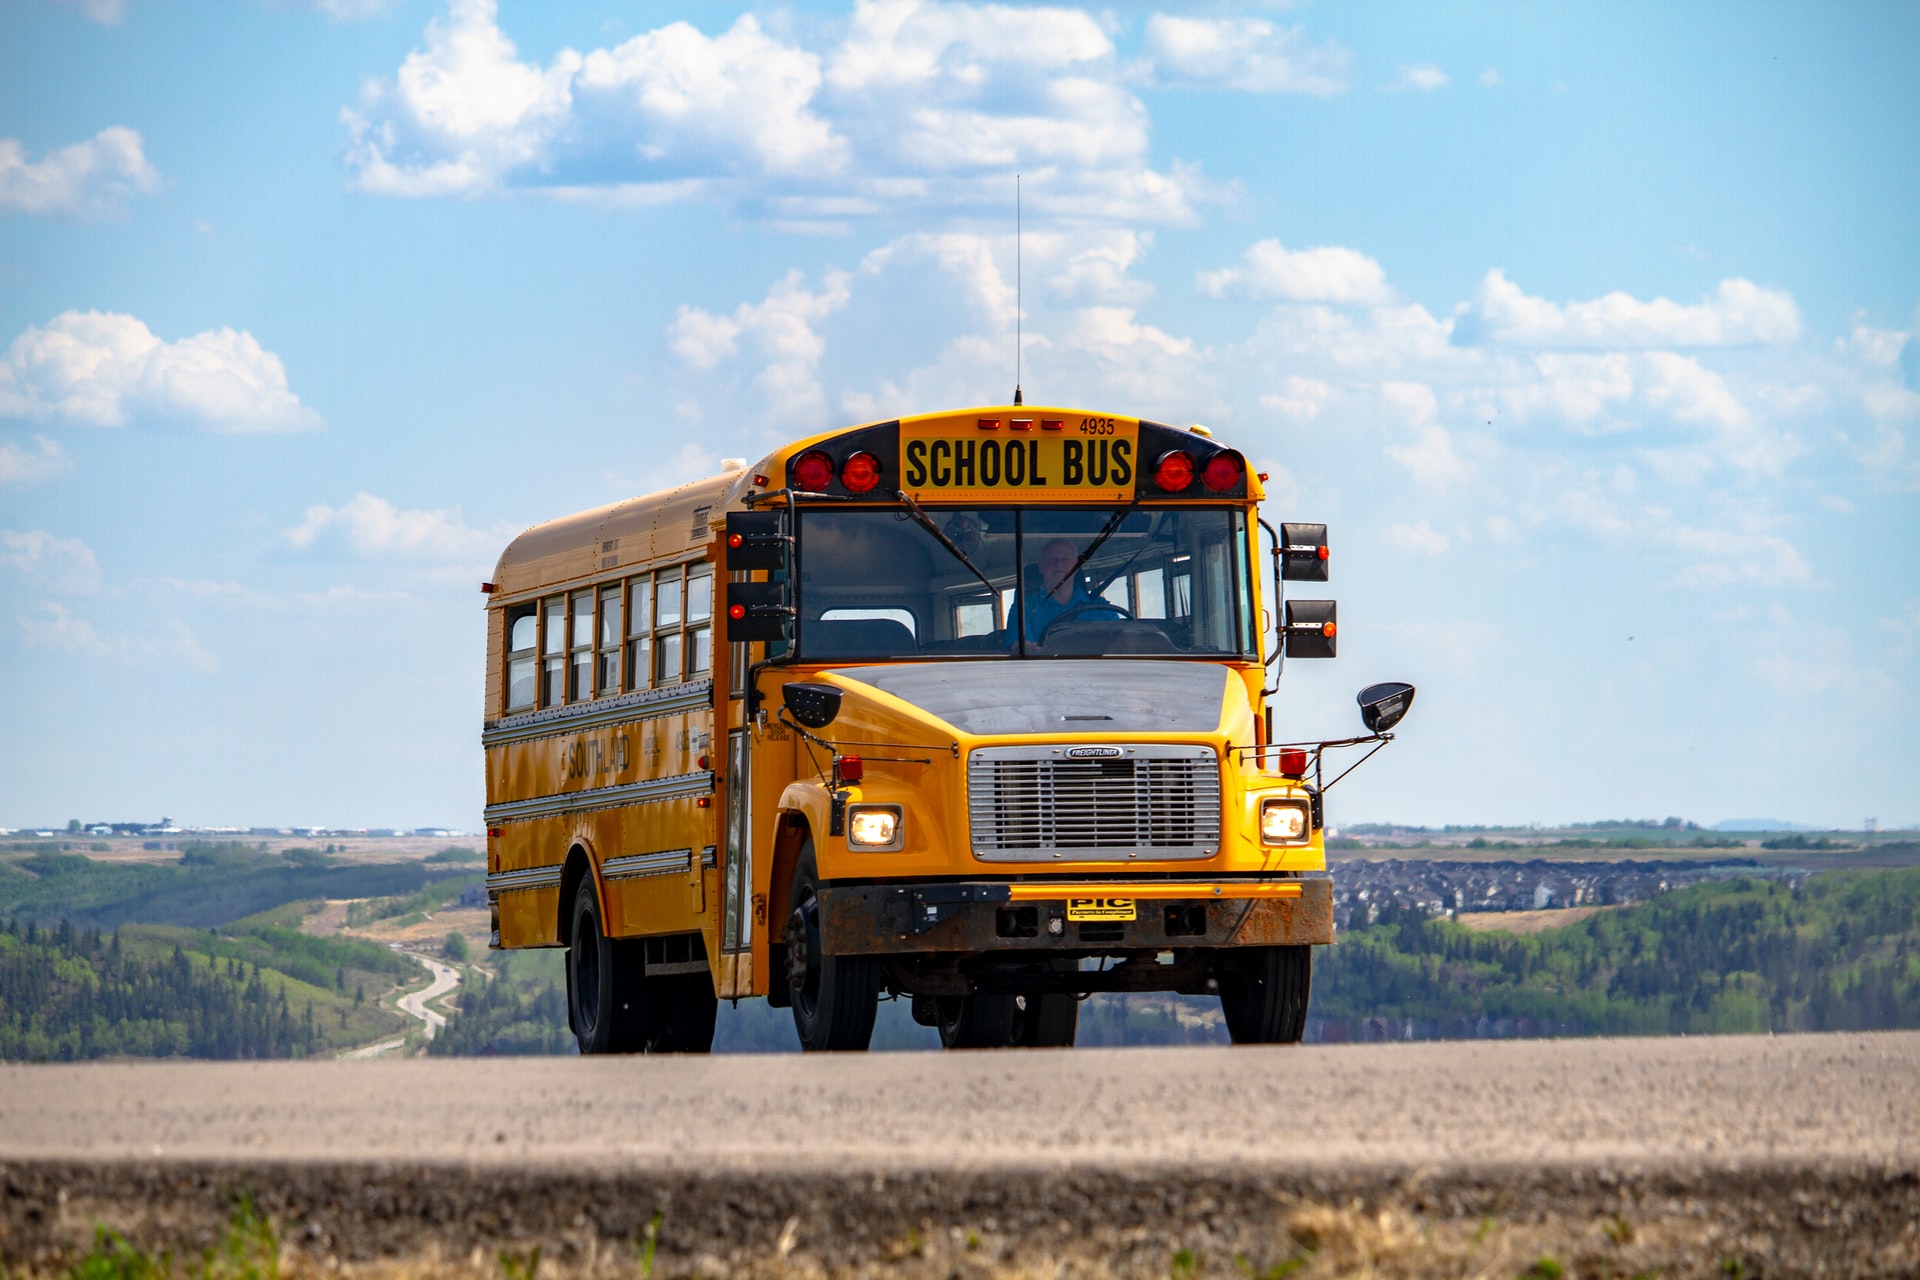 How Much Does a School Bus Weigh?